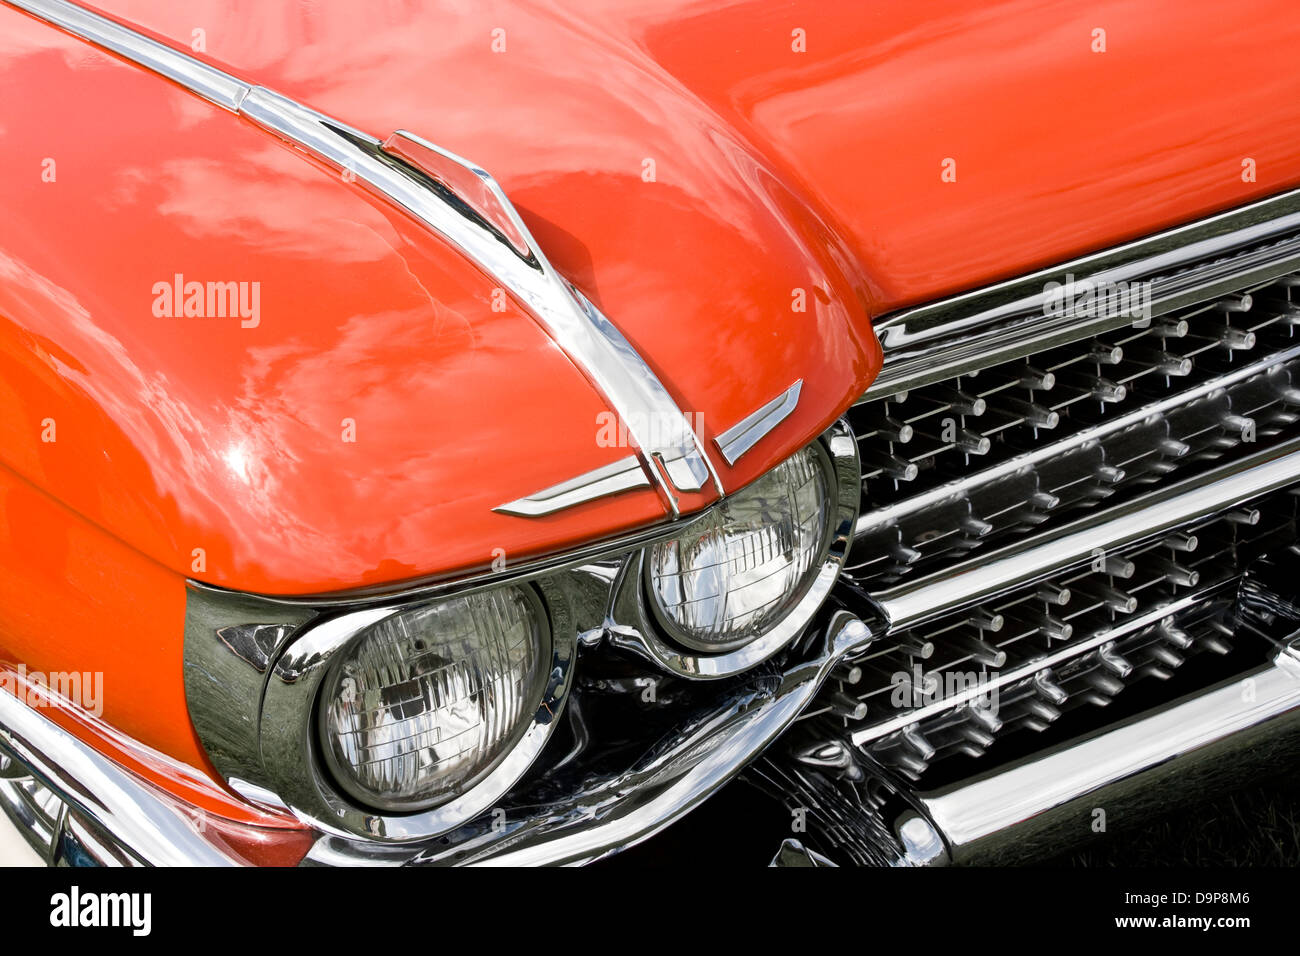 American classic car 1959 red Cadillac Coupe de Ville front wing lights headlights bonnet hood paintwork detail Stock Photo